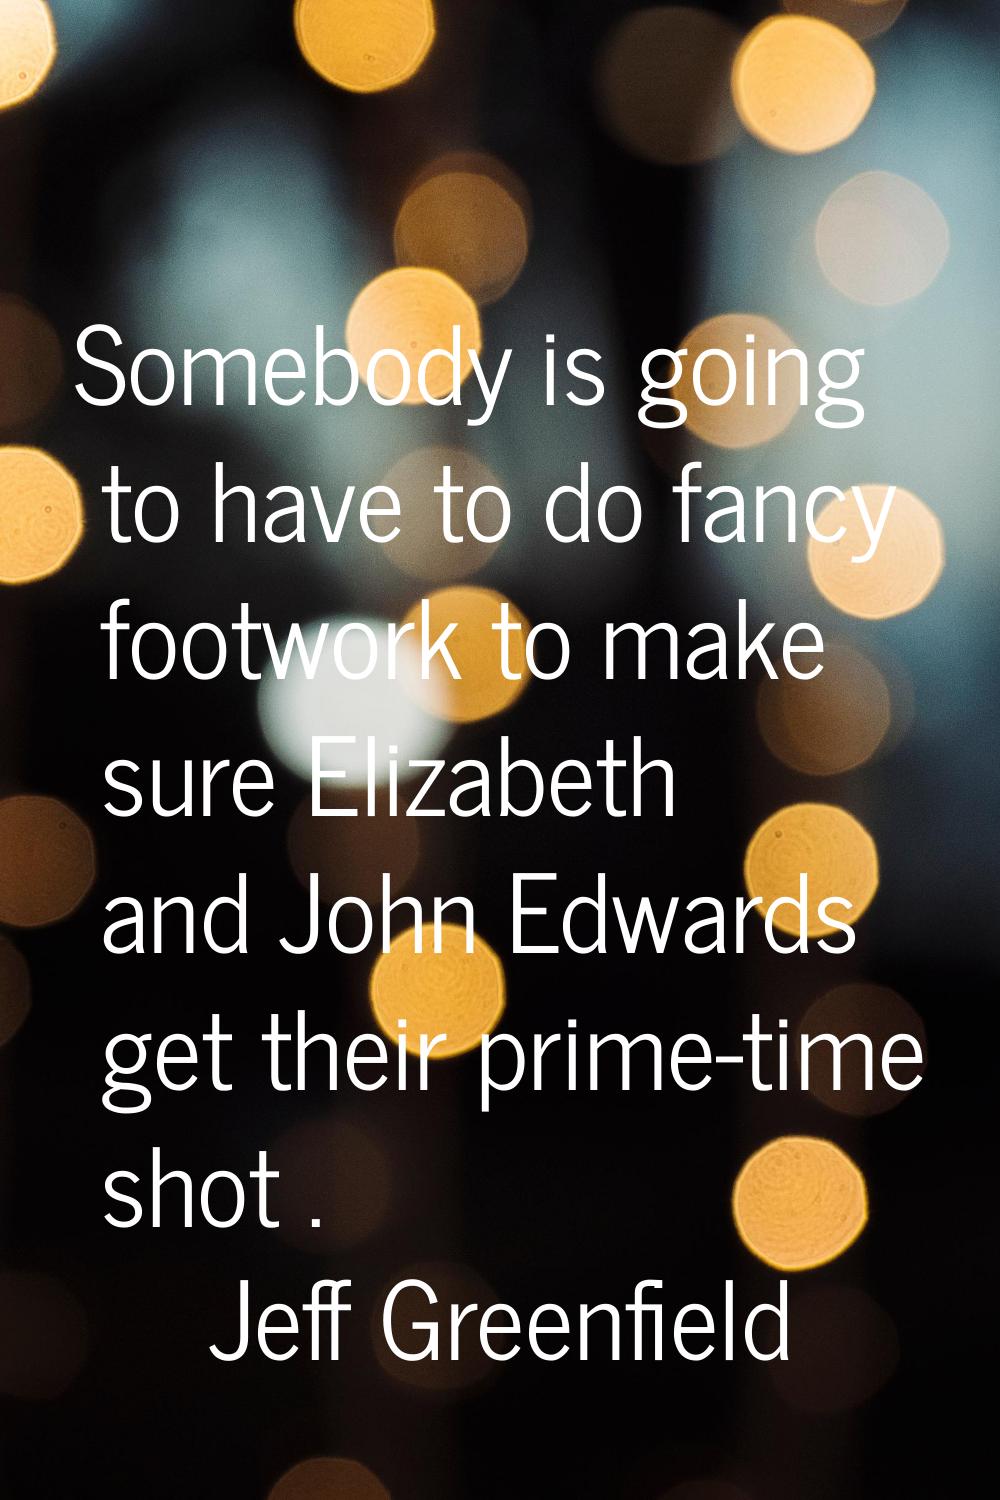 Somebody is going to have to do fancy footwork to make sure Elizabeth and John Edwards get their pr